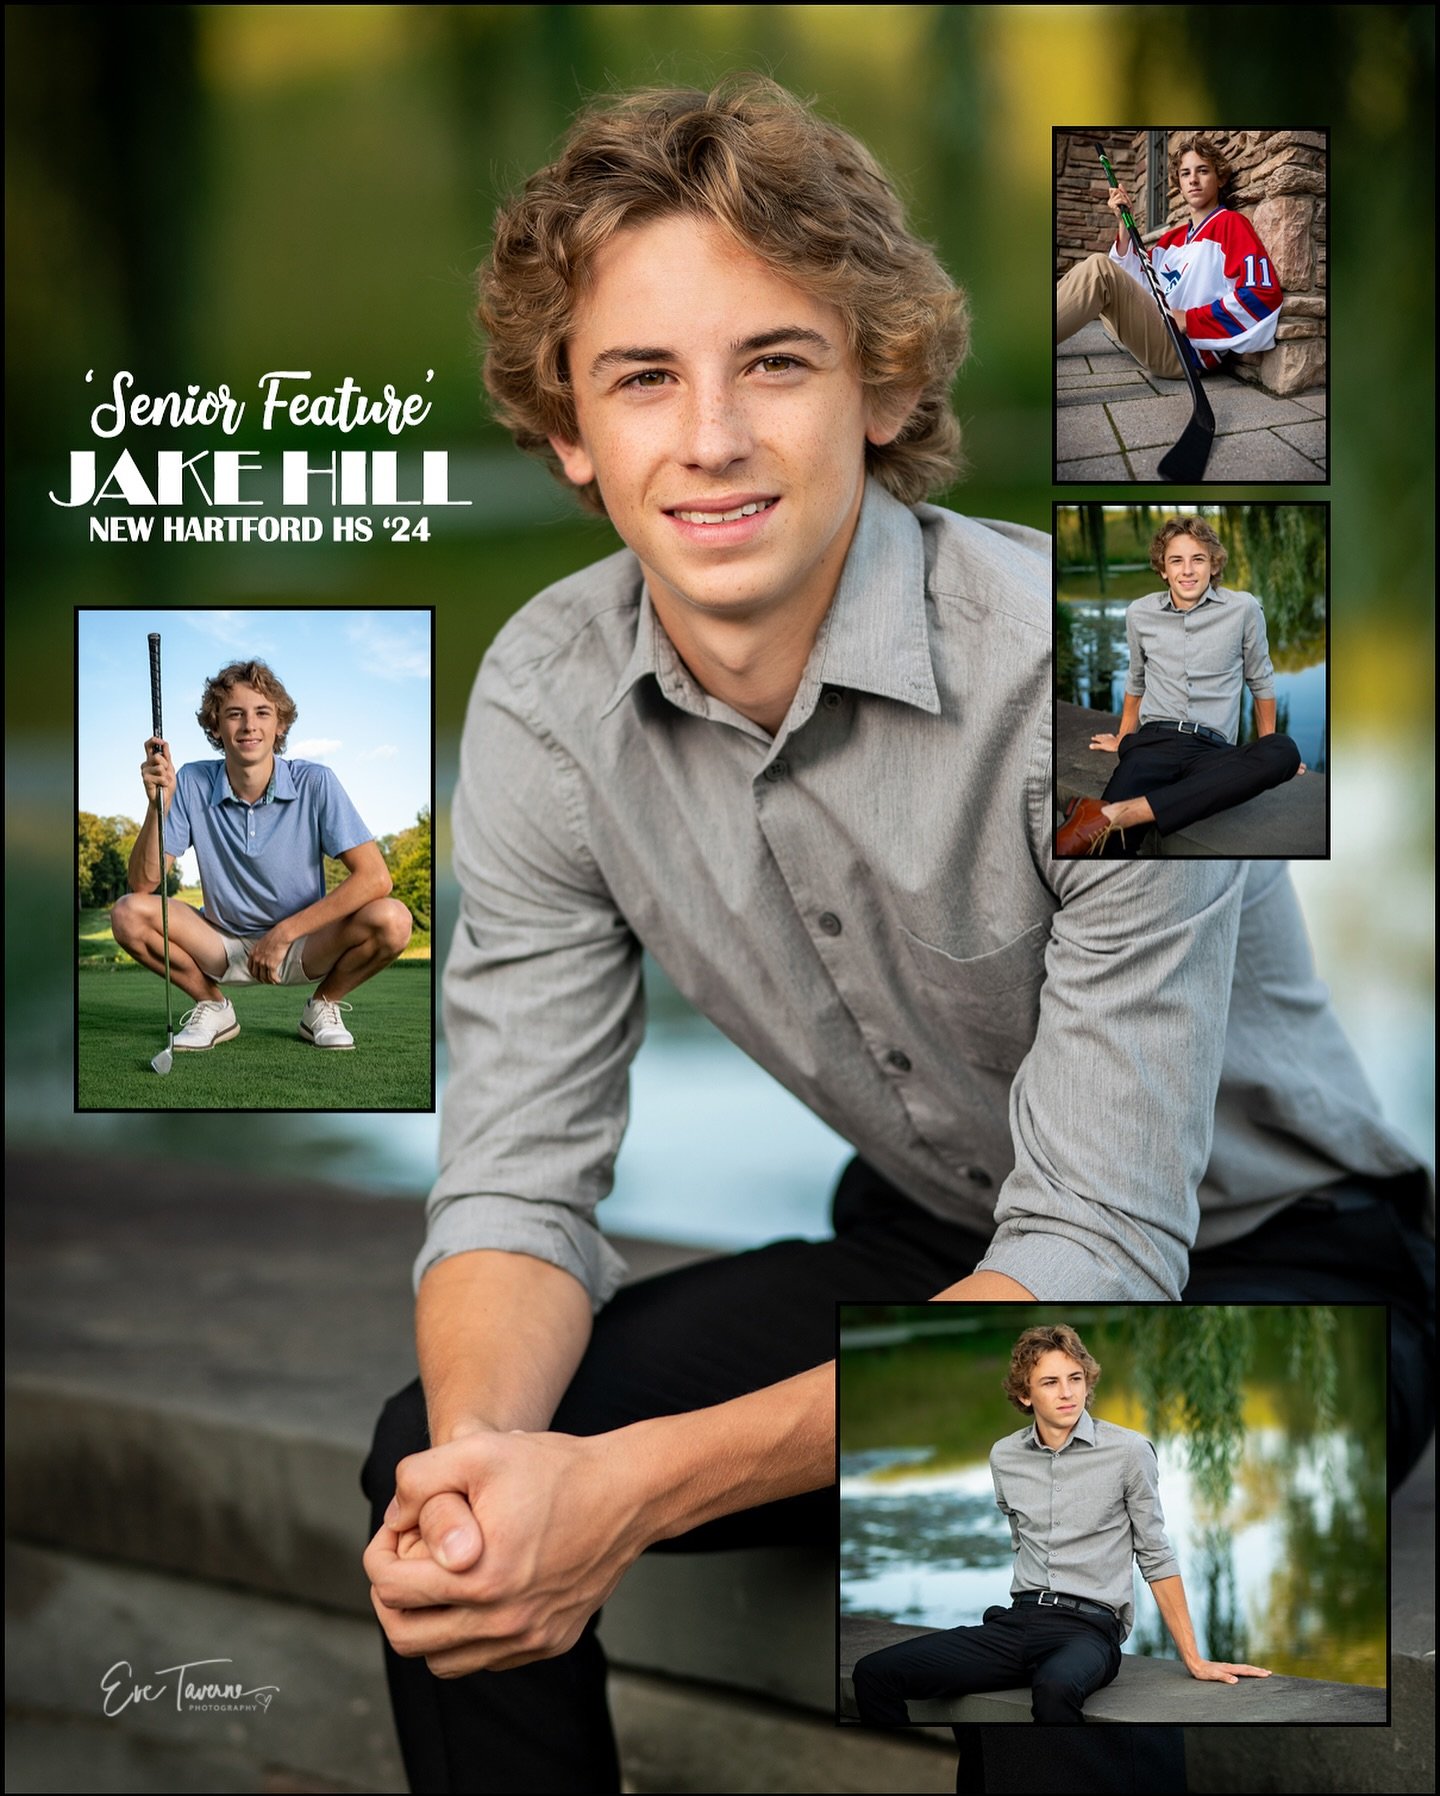 SENIOR FEATURE! Jake Hill 
New Hartford Senior High School 
#Classof2024
#ETPSeniorFeature
@jake_hill1017 

Congratulations Jake on your high school career, and all the best to you on your future endeavors. I&rsquo;m so grateful for the opportunity t